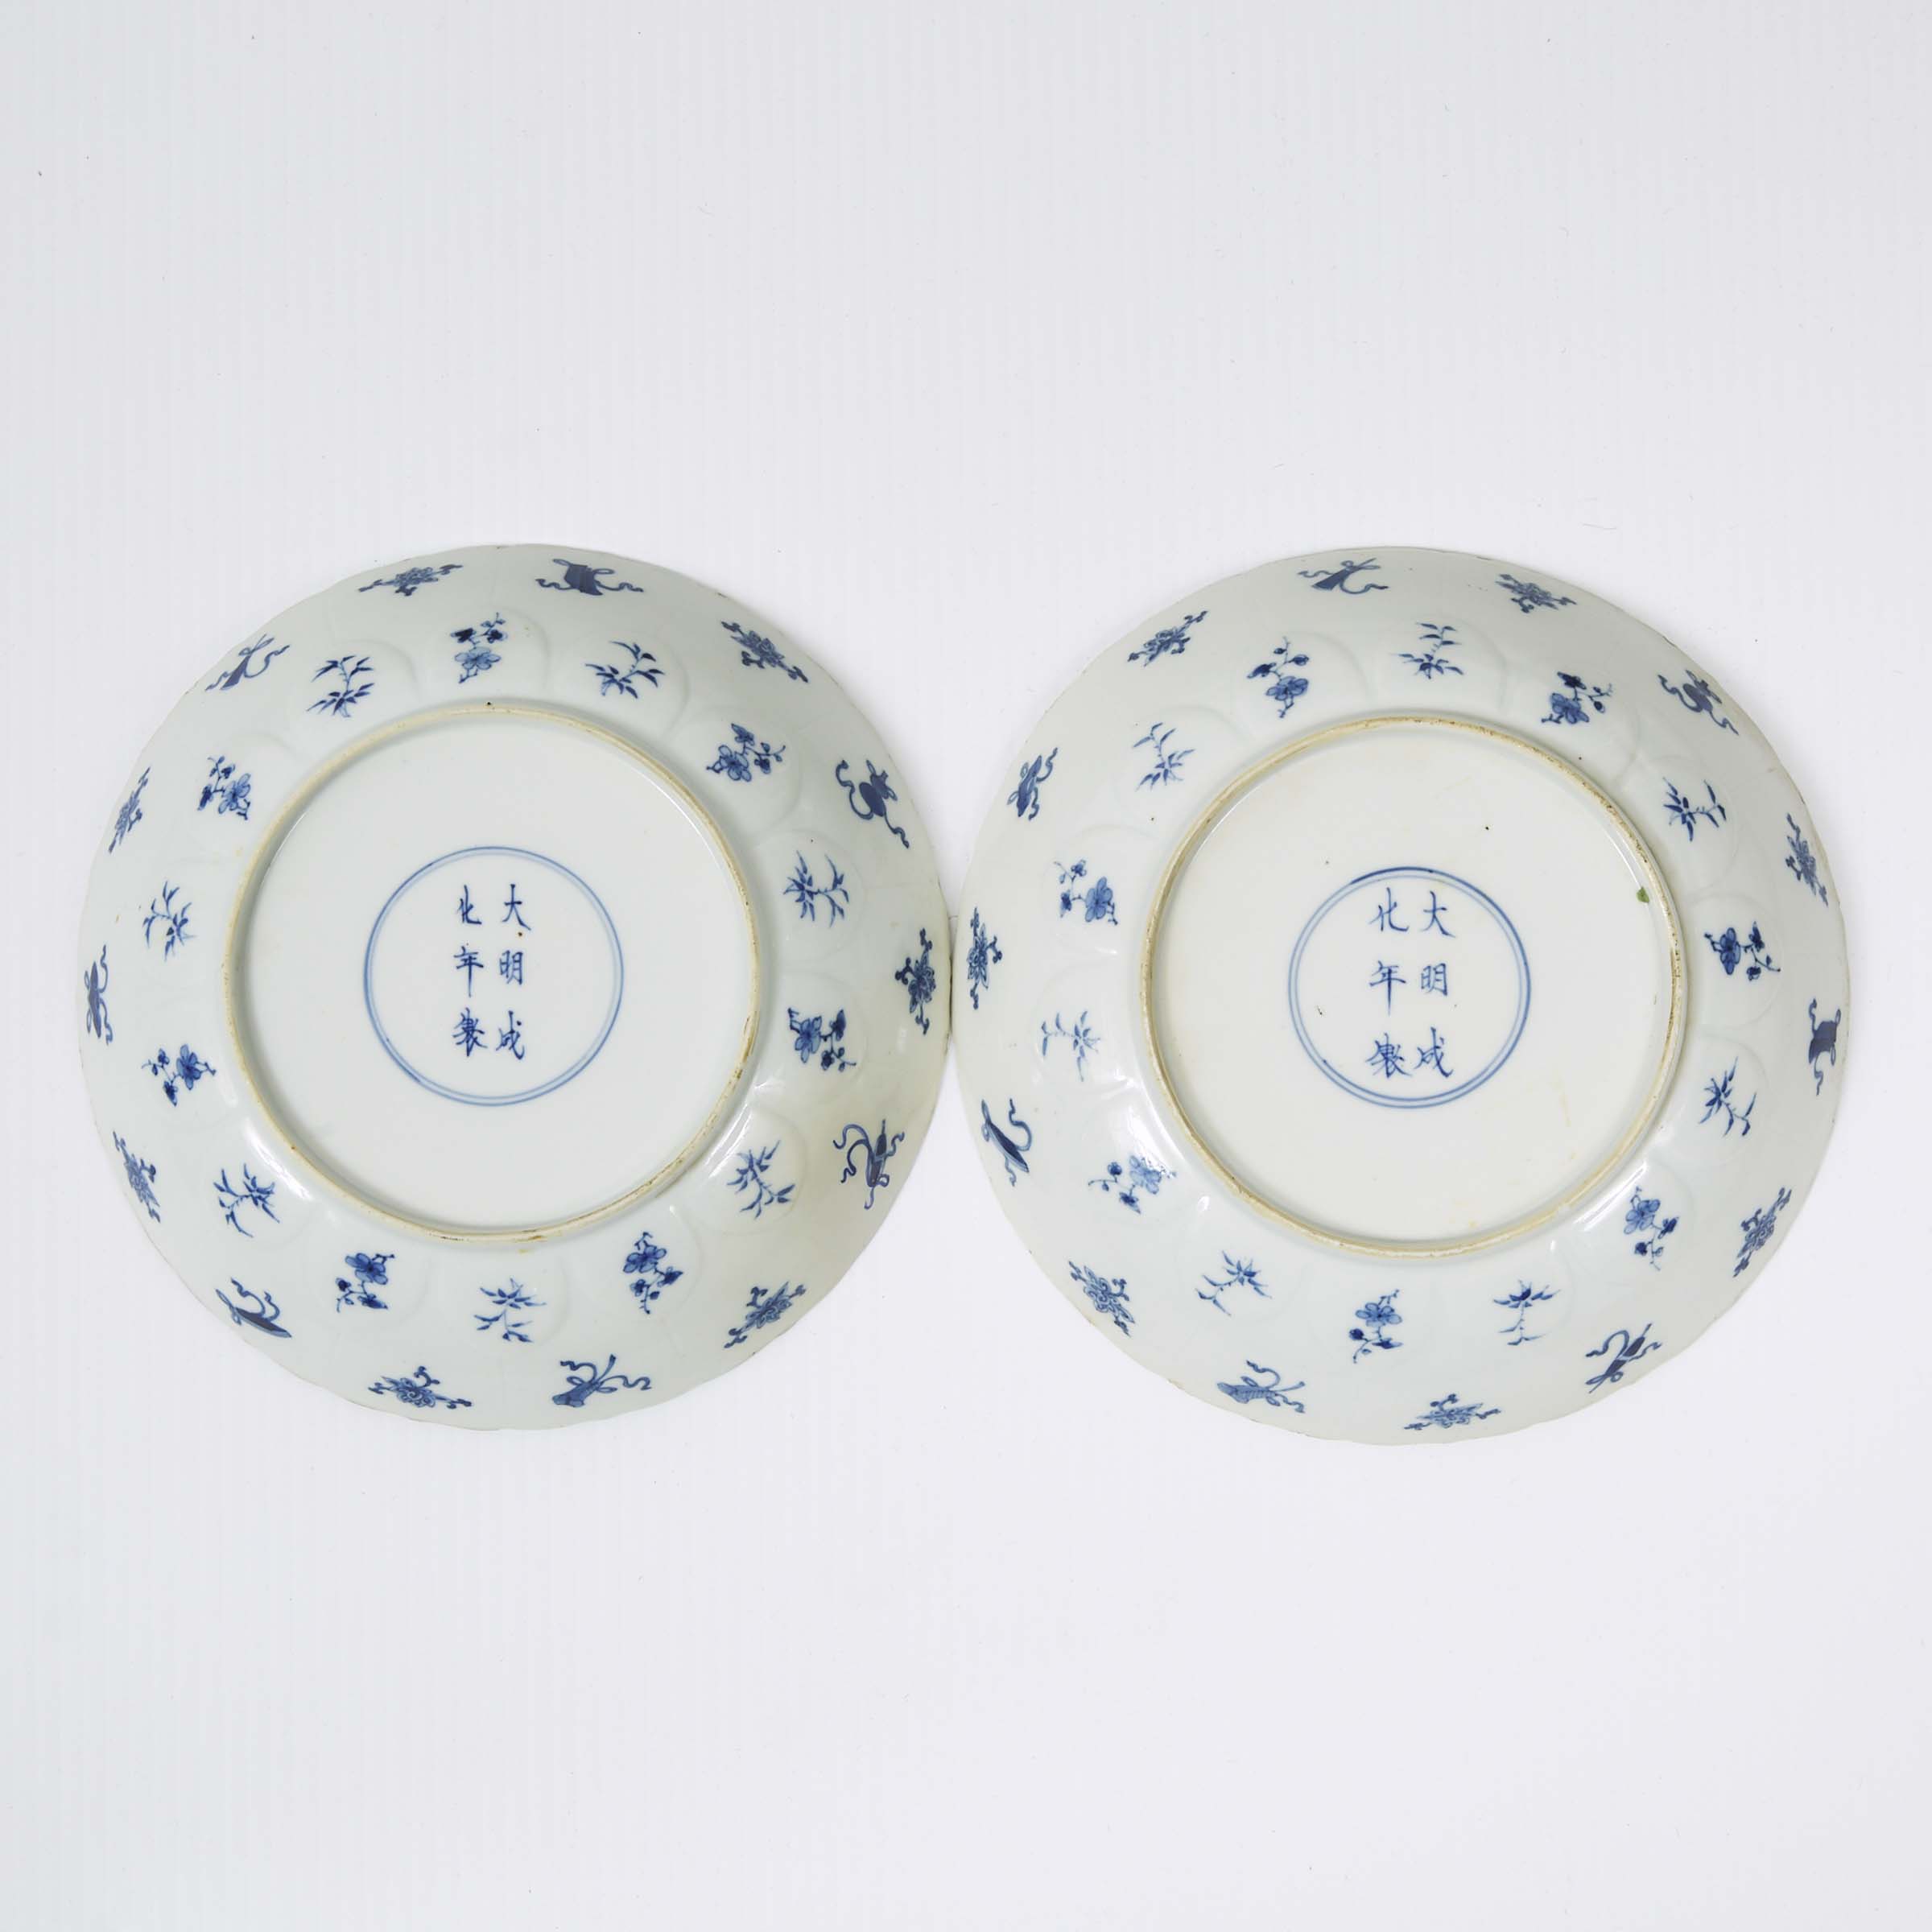 A Pair of Blue and White 'Ladies and Phoenix' Barbed Rim Dishes, Kangxi Period (1662-1722)